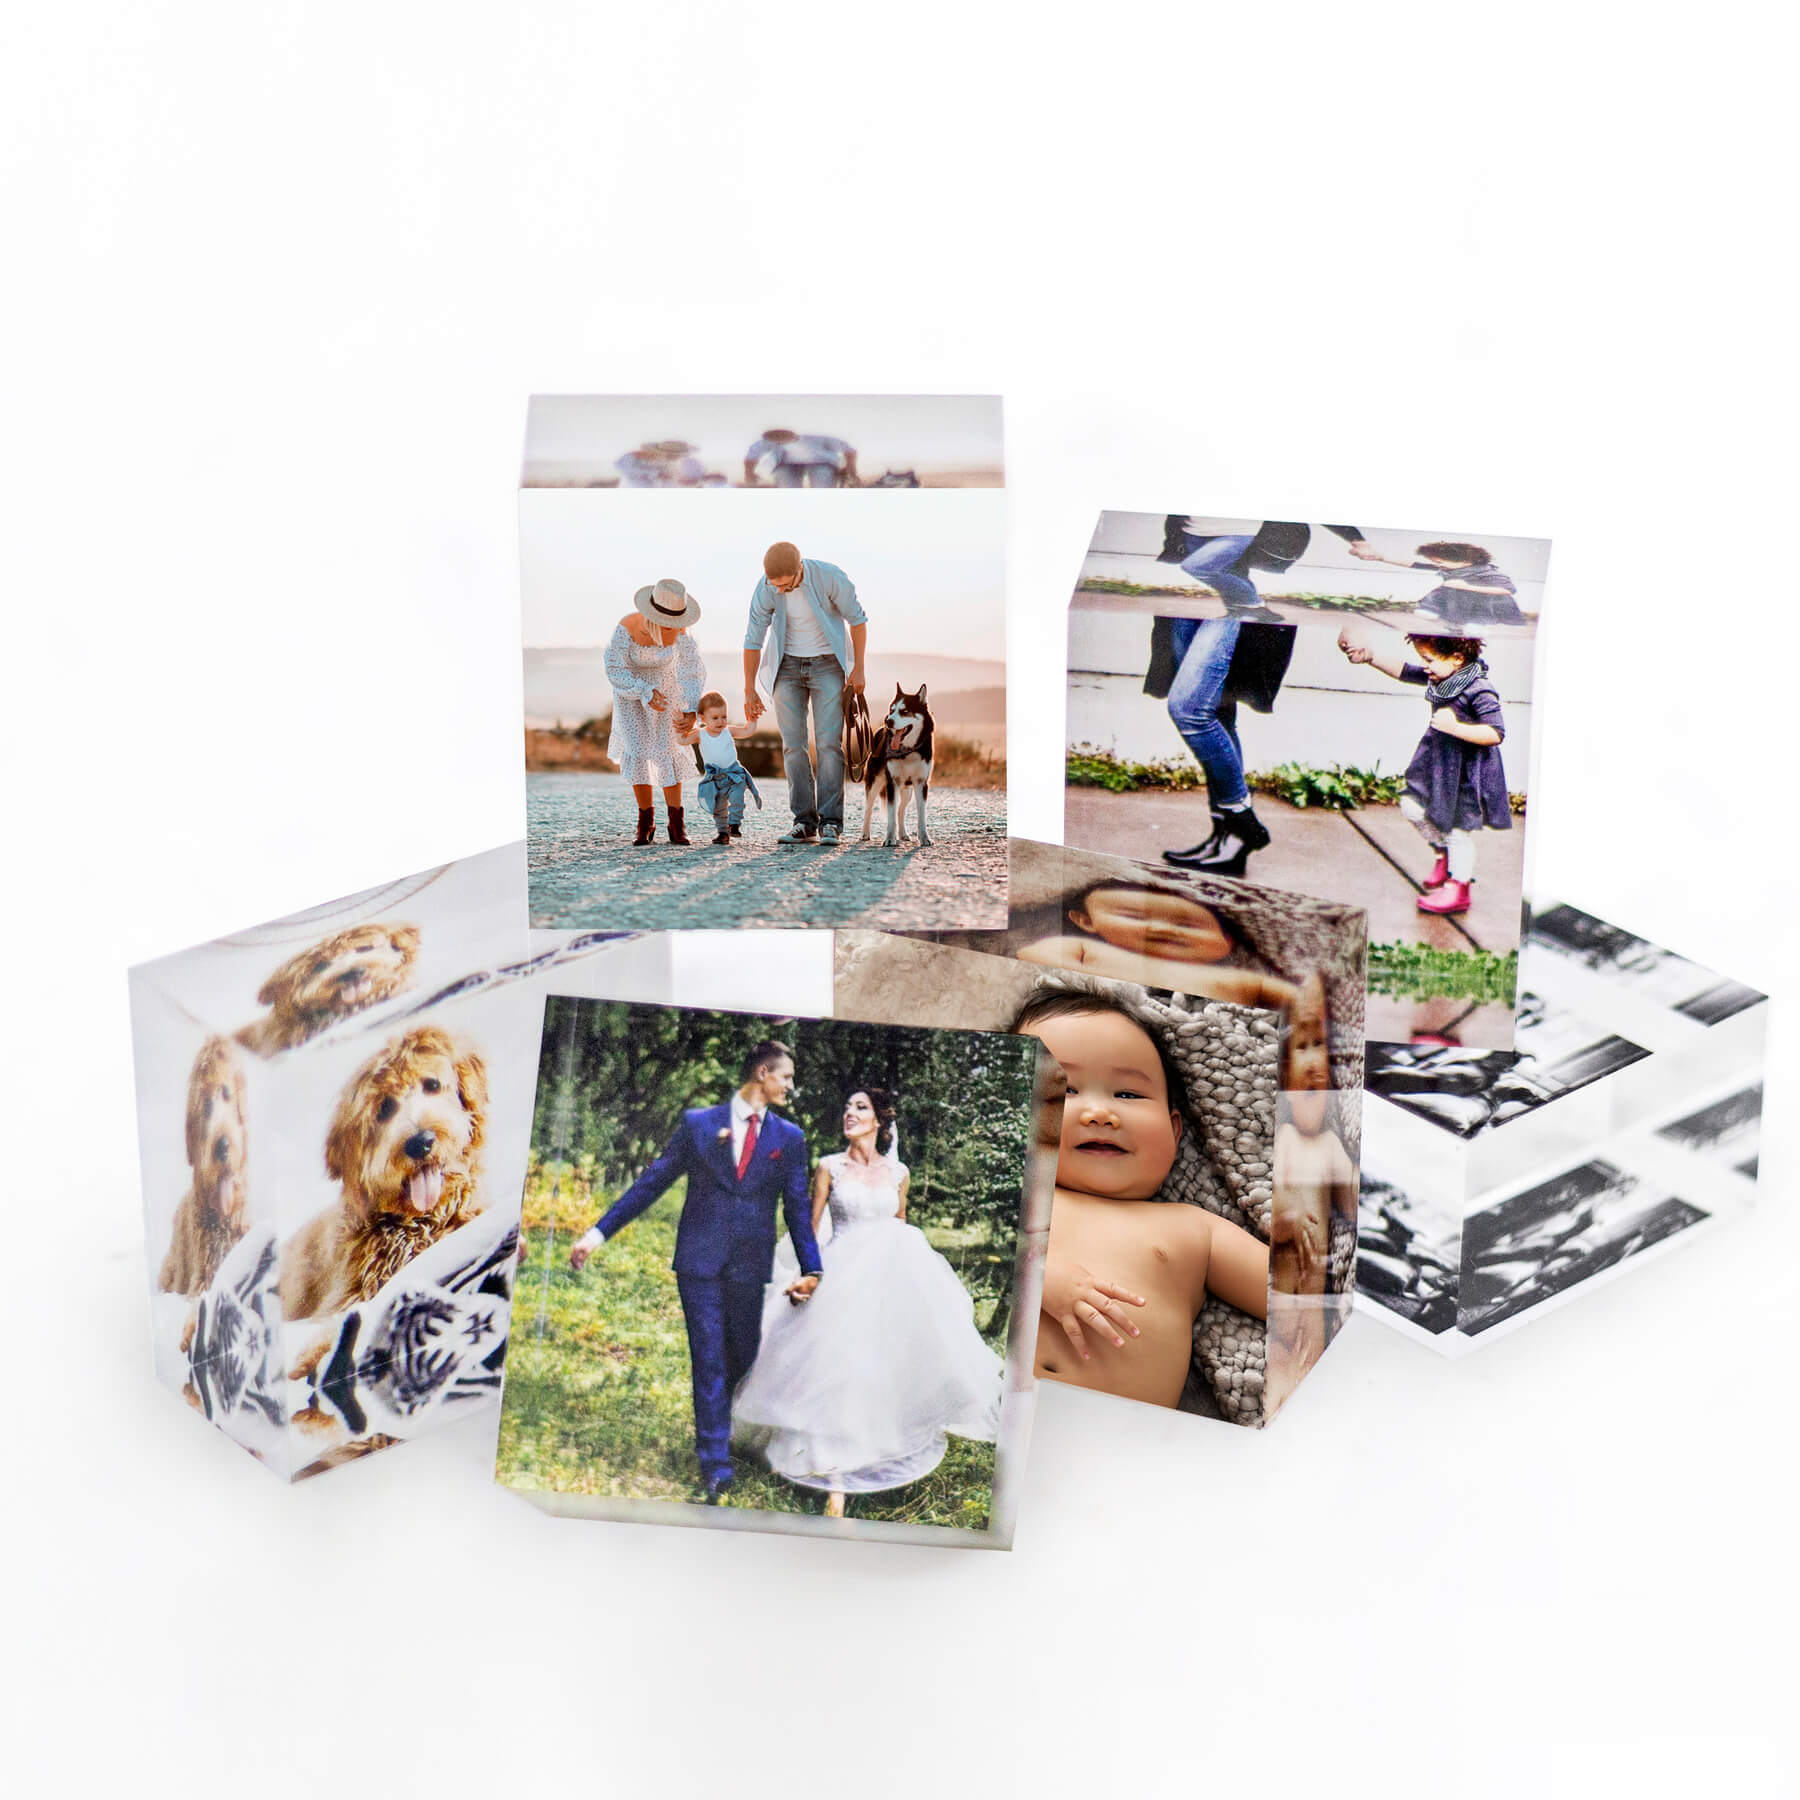 Details about   Personalised Printed Square Acrylic Photo Block Picture Frame Gift 5"X5" 